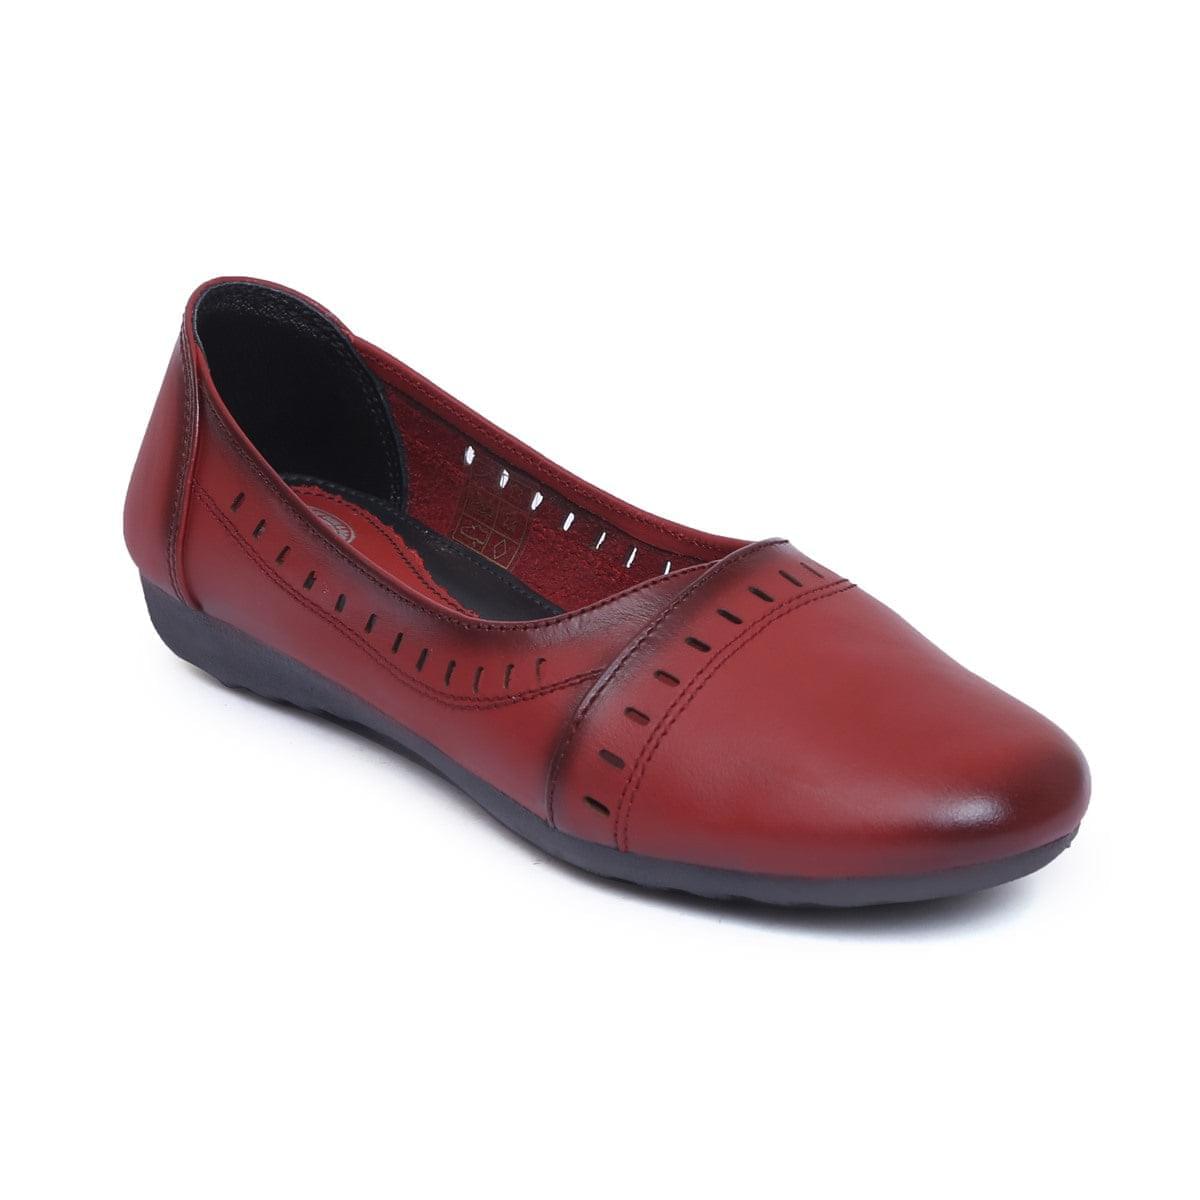 Genuine Leather Bellies for Women VN-25